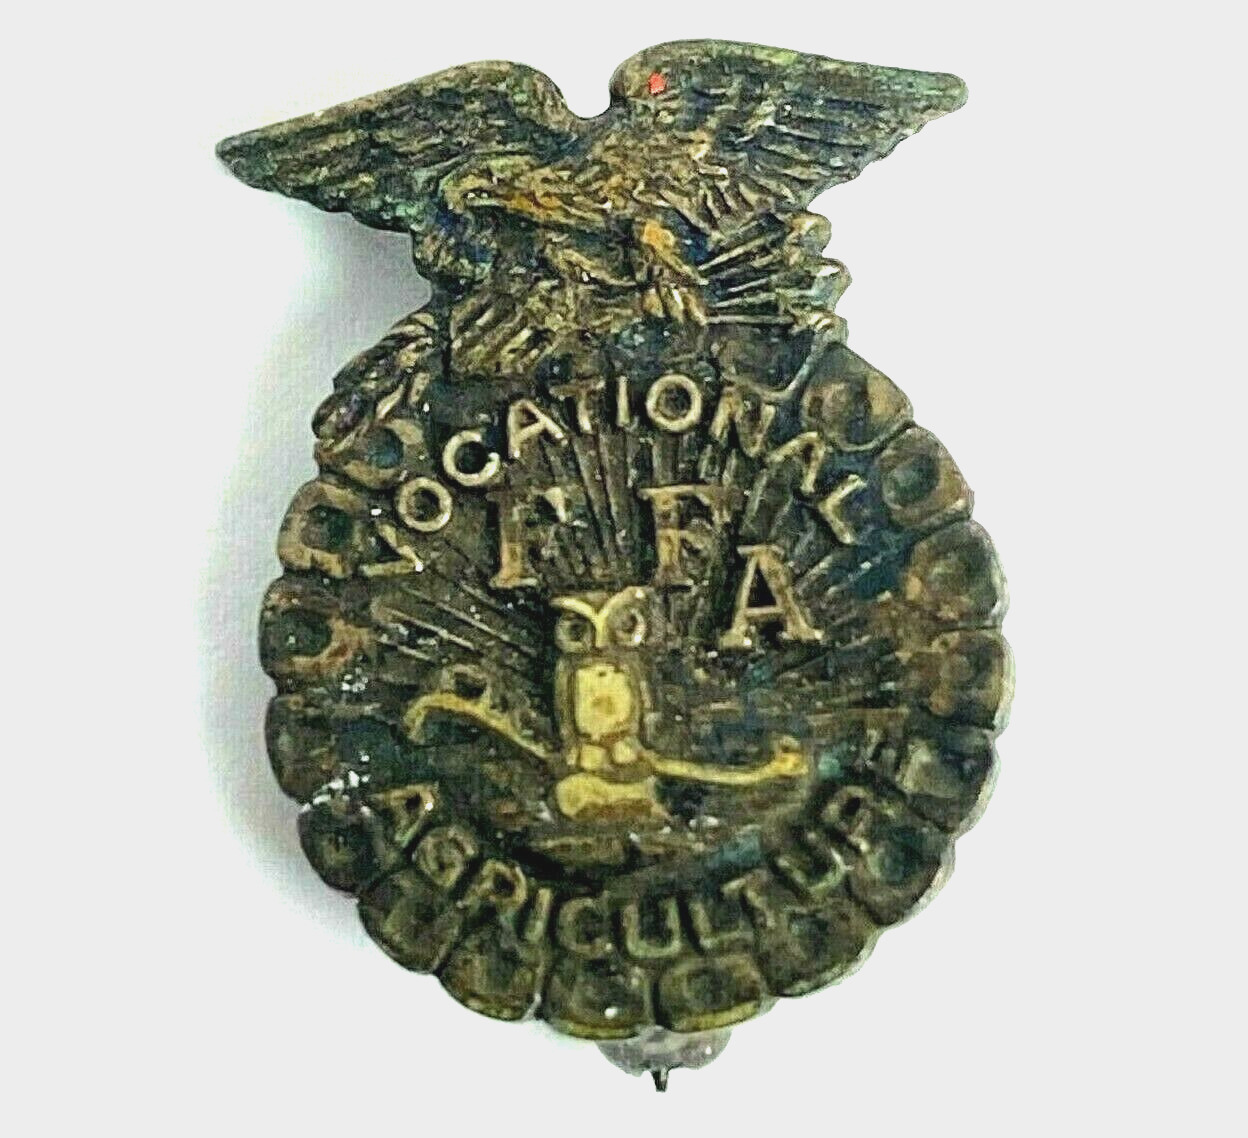 FFA Future Farmers Of America Agricultural Vocational Lapel Pin Pinback Vintage